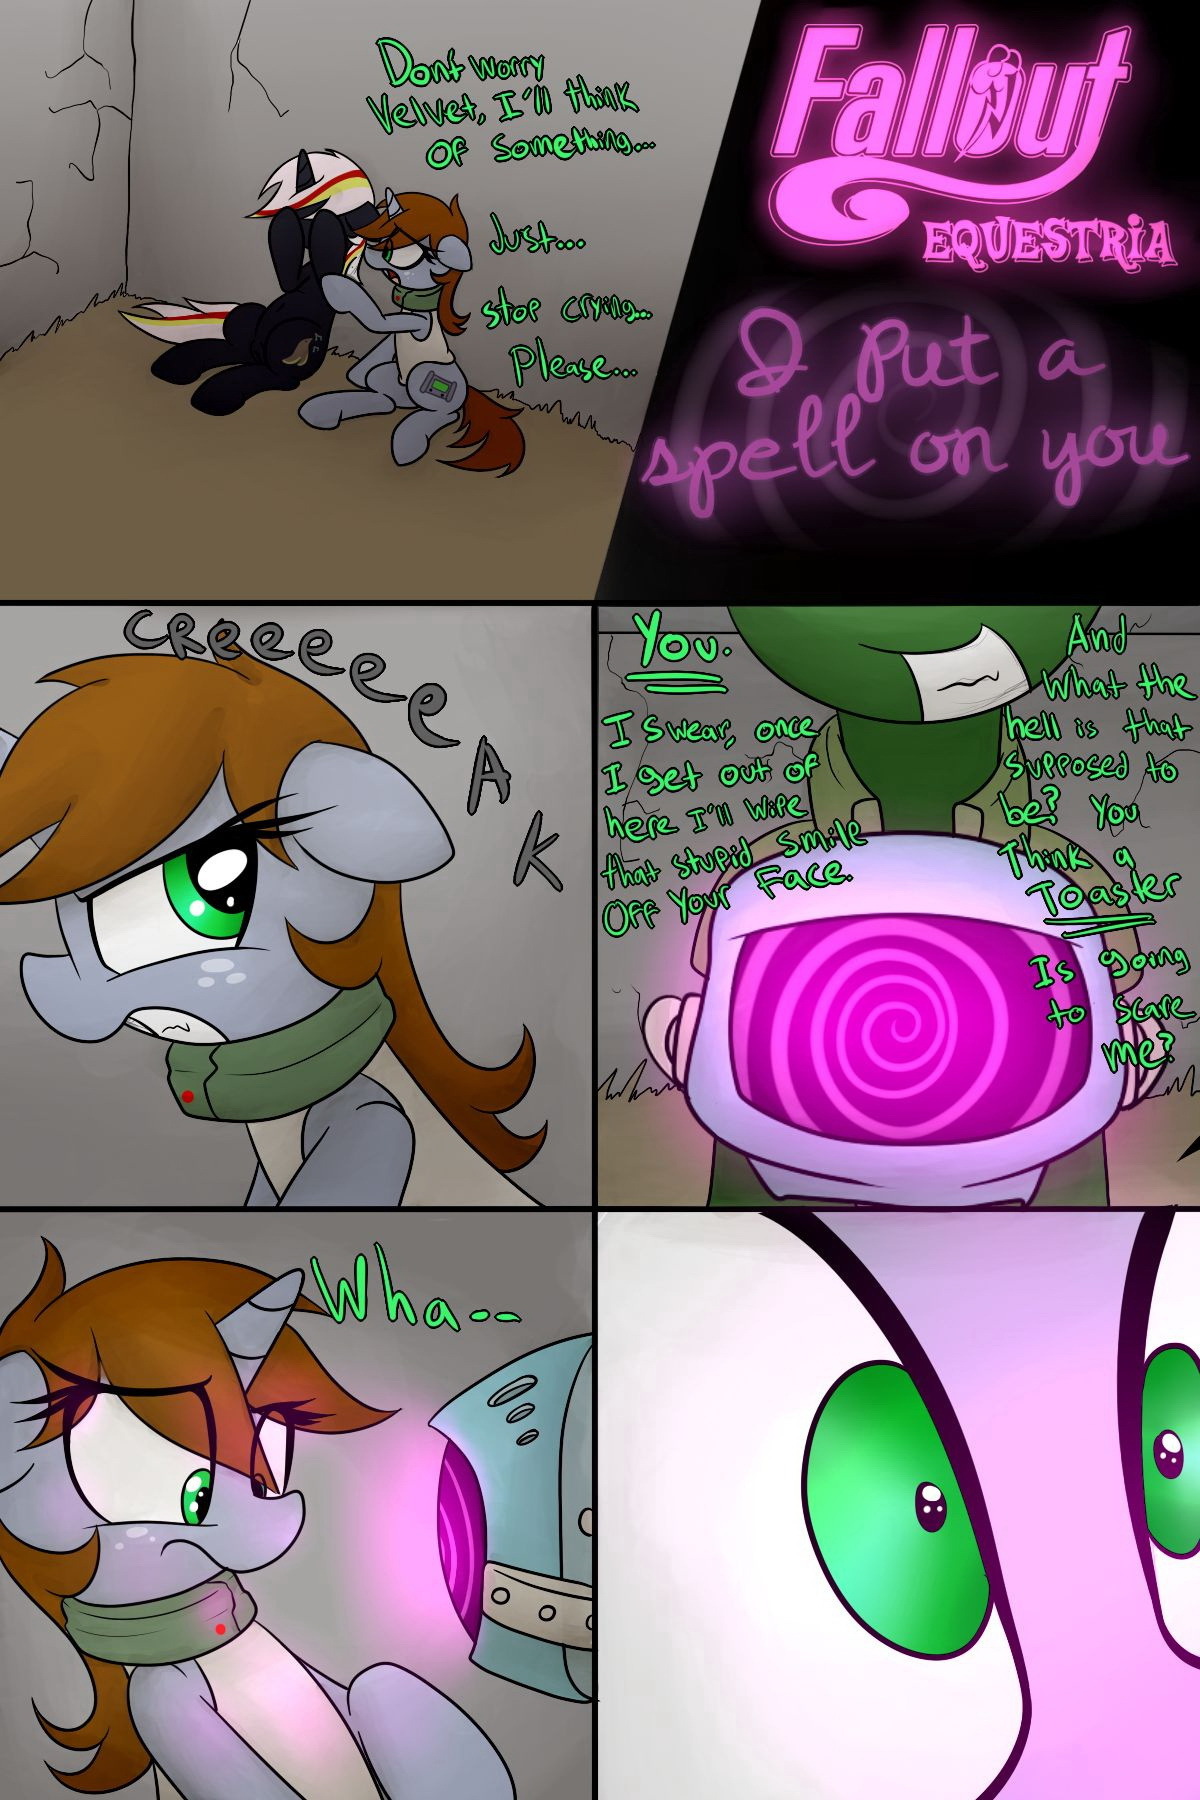 Fallout Equestria - I Put a Spell on You - Page 1